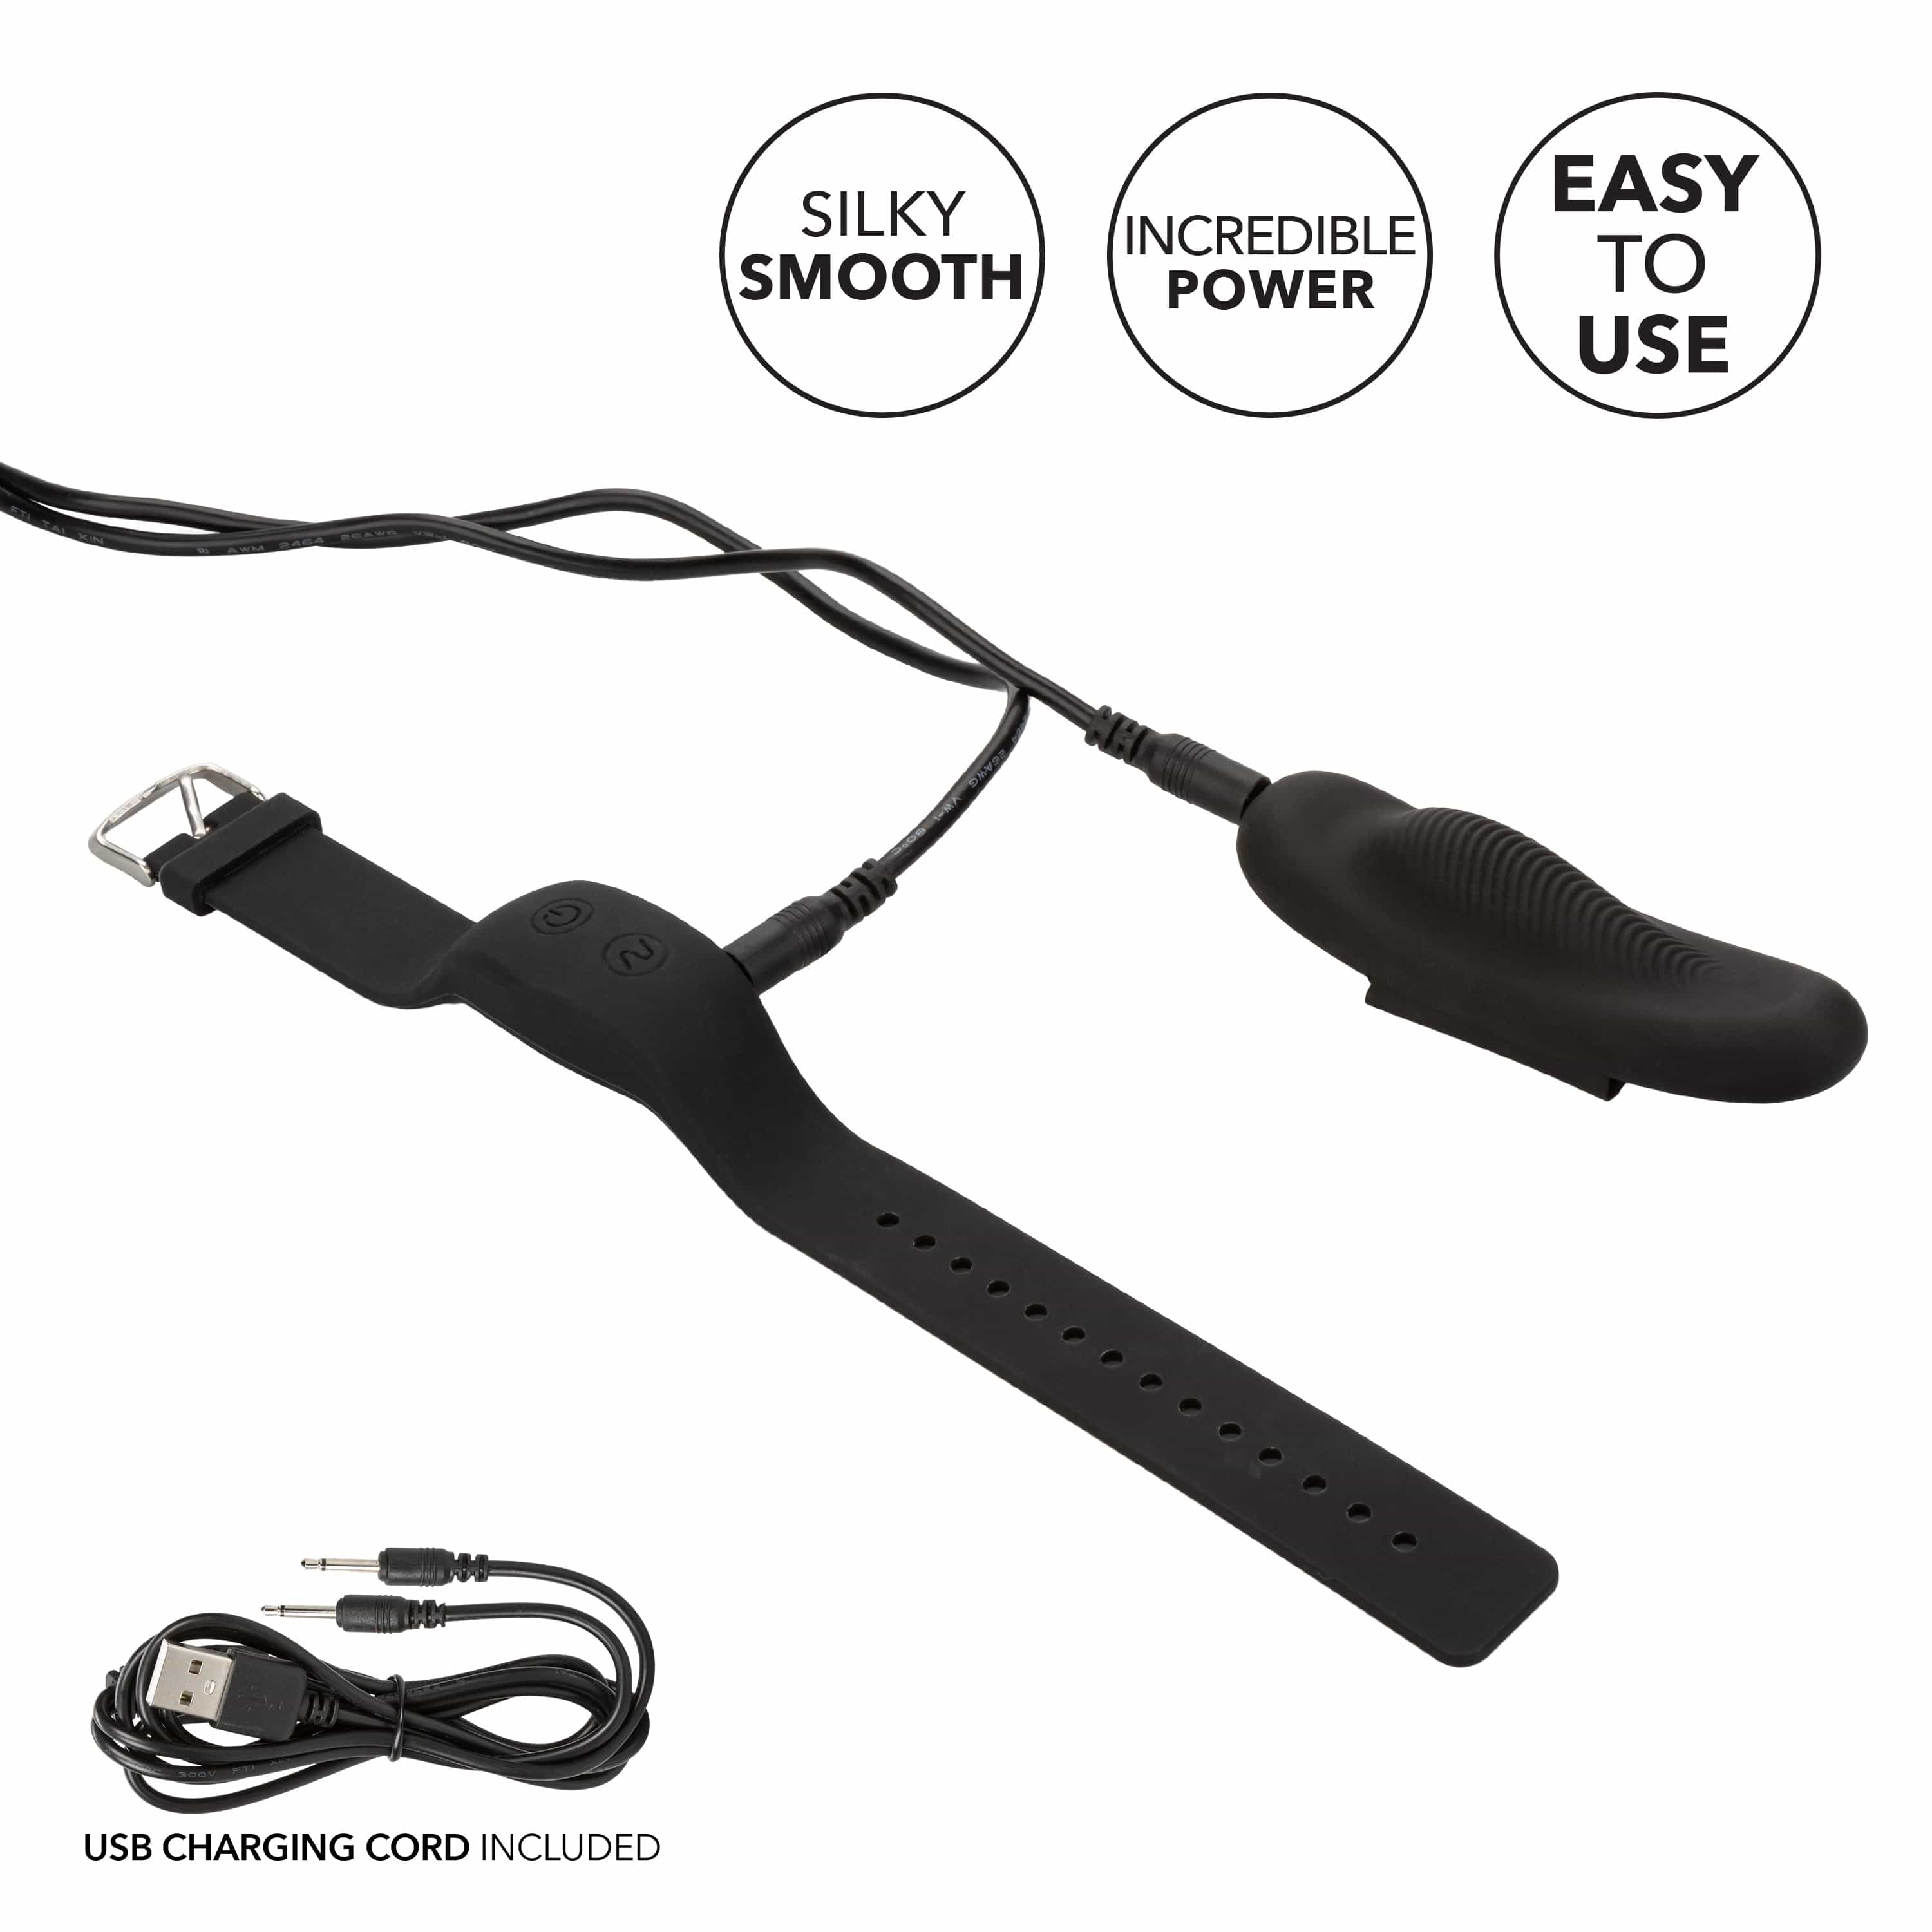 LOCK-N-PLAY WRISTBAND REMOTE PANTY TEASER